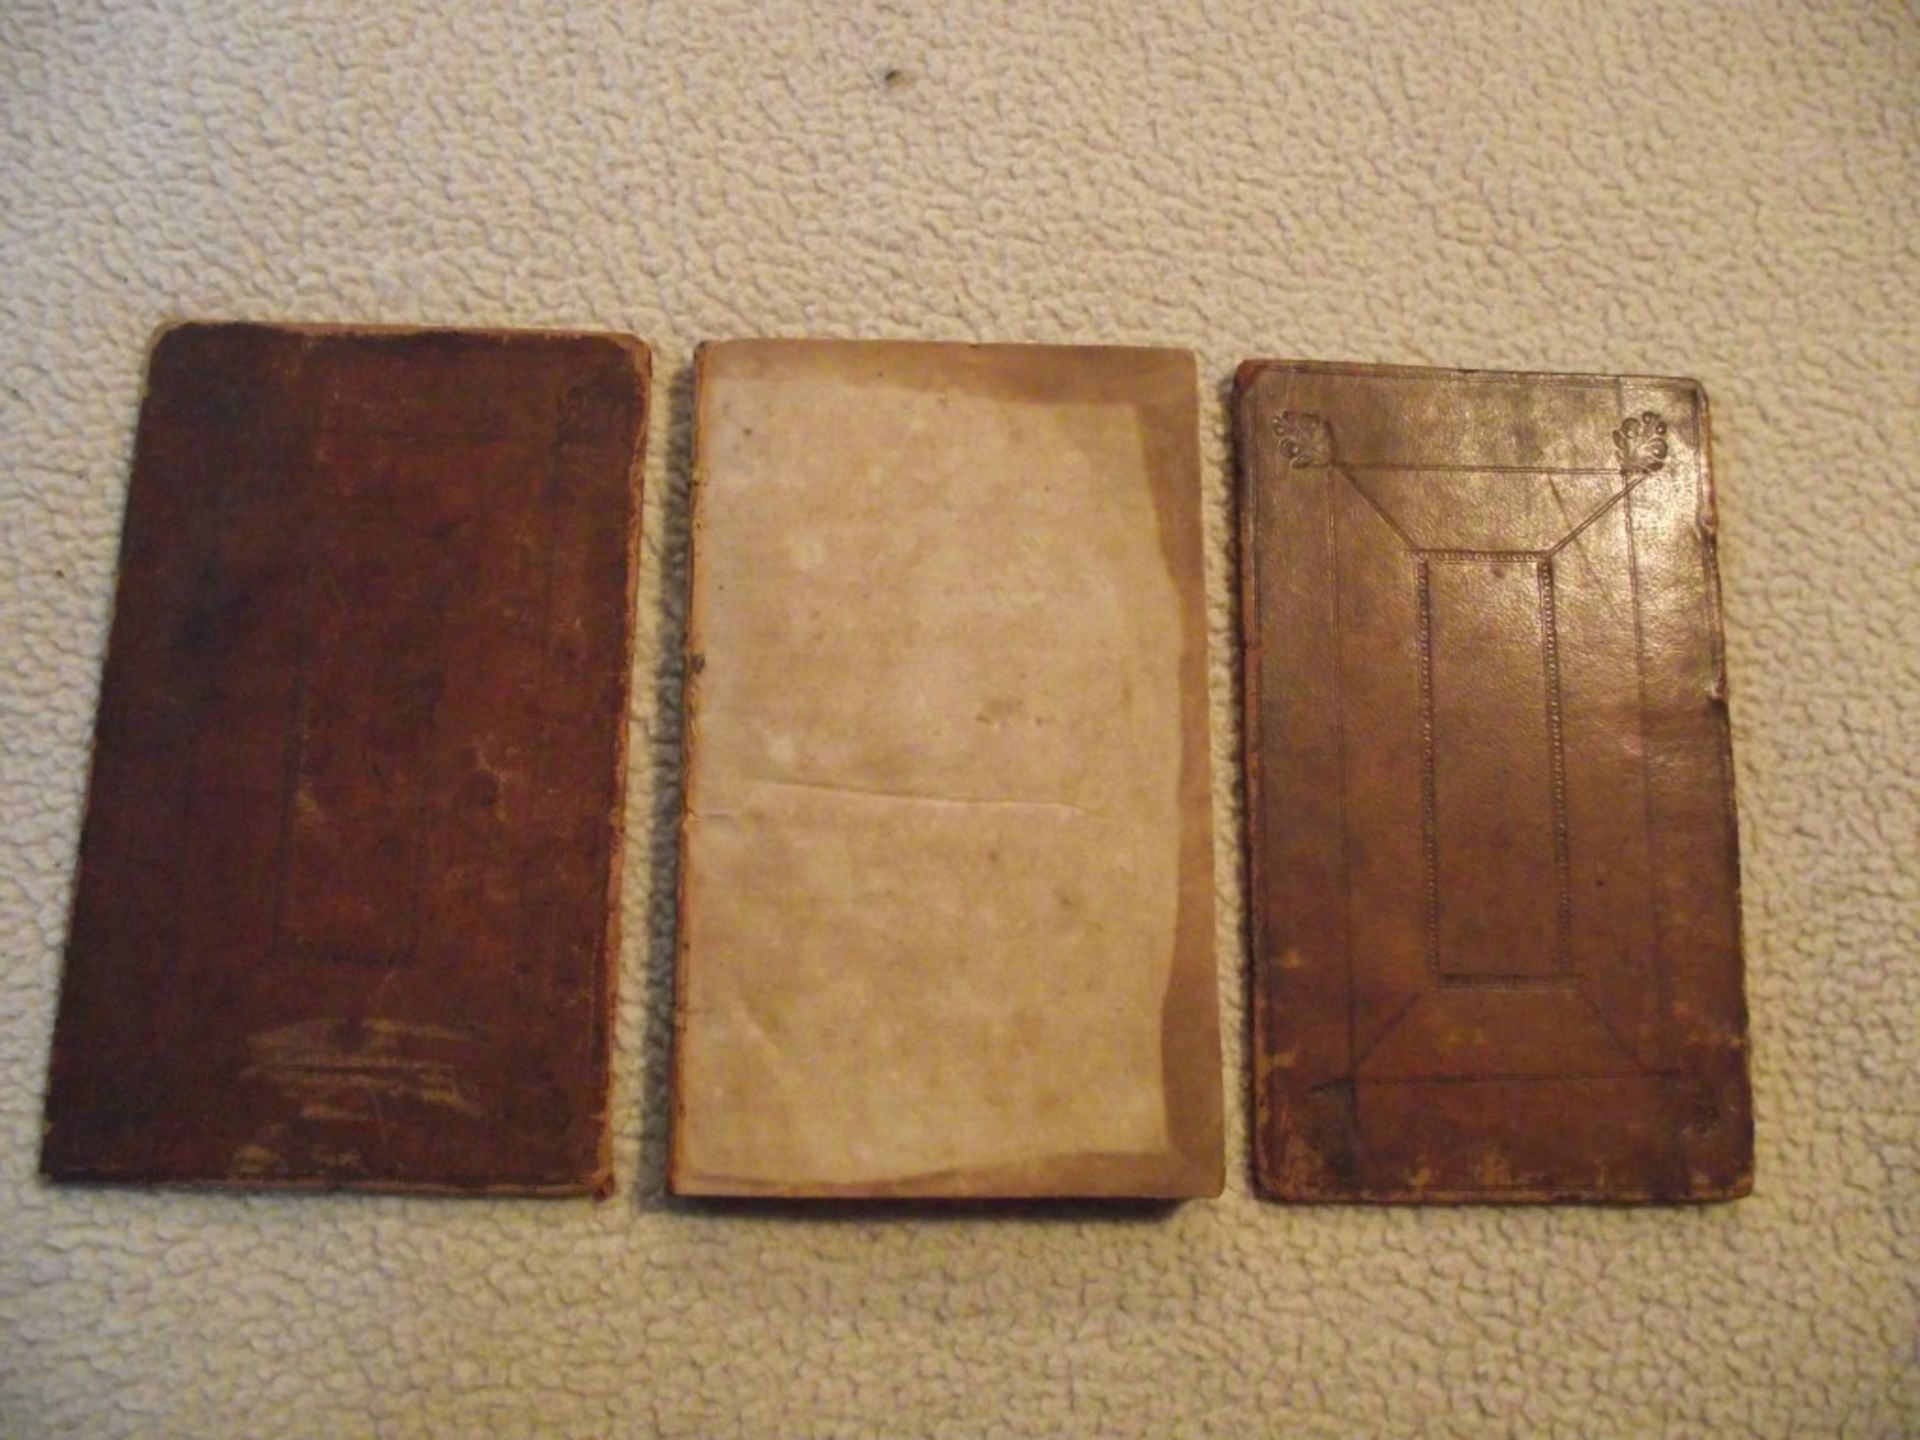 Four Sermons By William Lord Bishop of St. Asaph - Printed For Charles Harper 1712 - Image 26 of 31